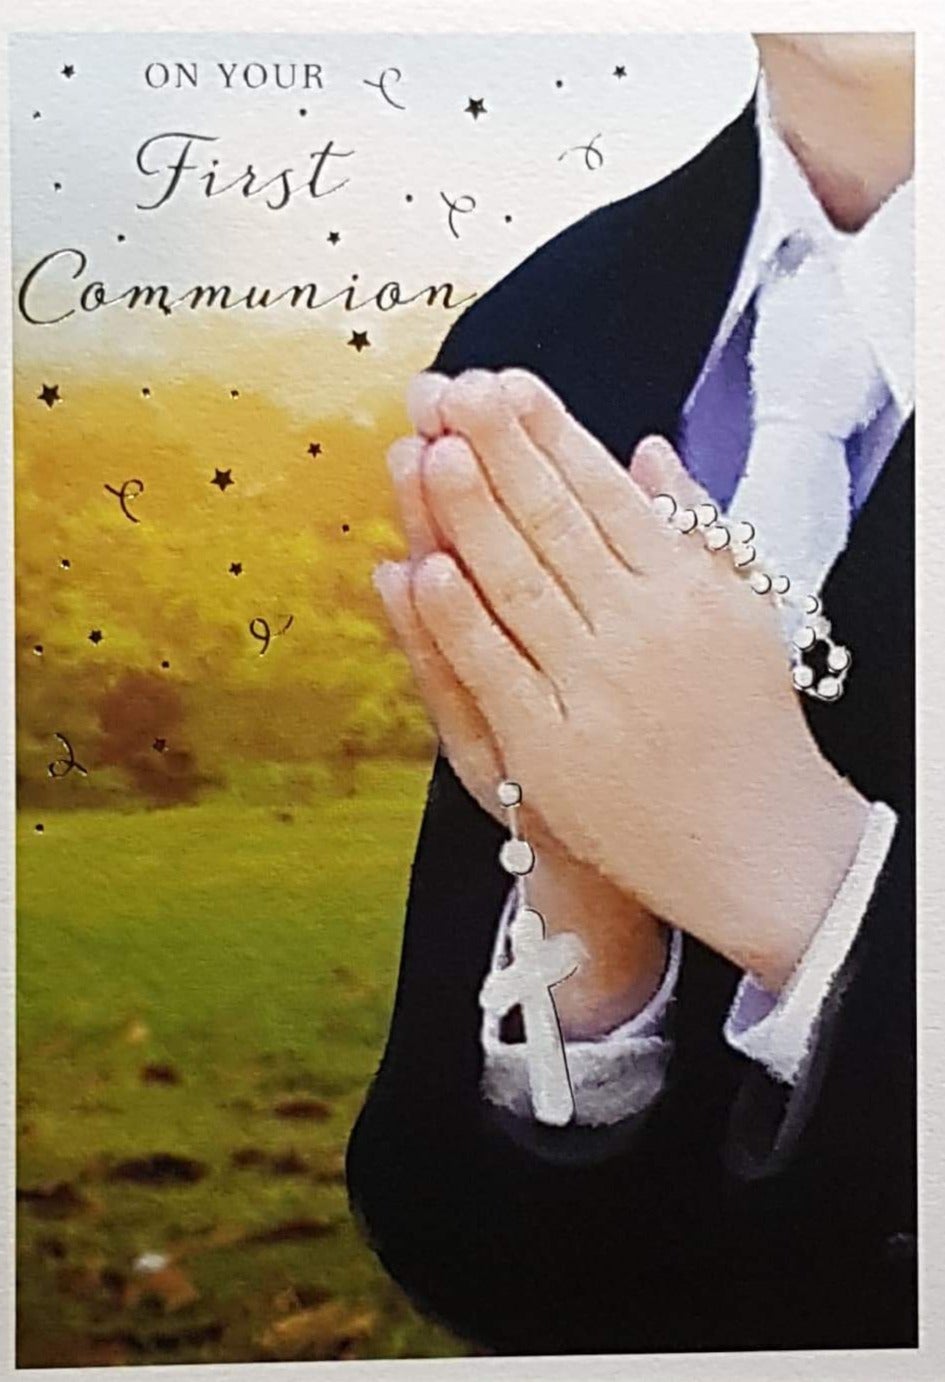 Communion Card - Boy - On Your First Communion & Boy Holding Rosary Beads Praying